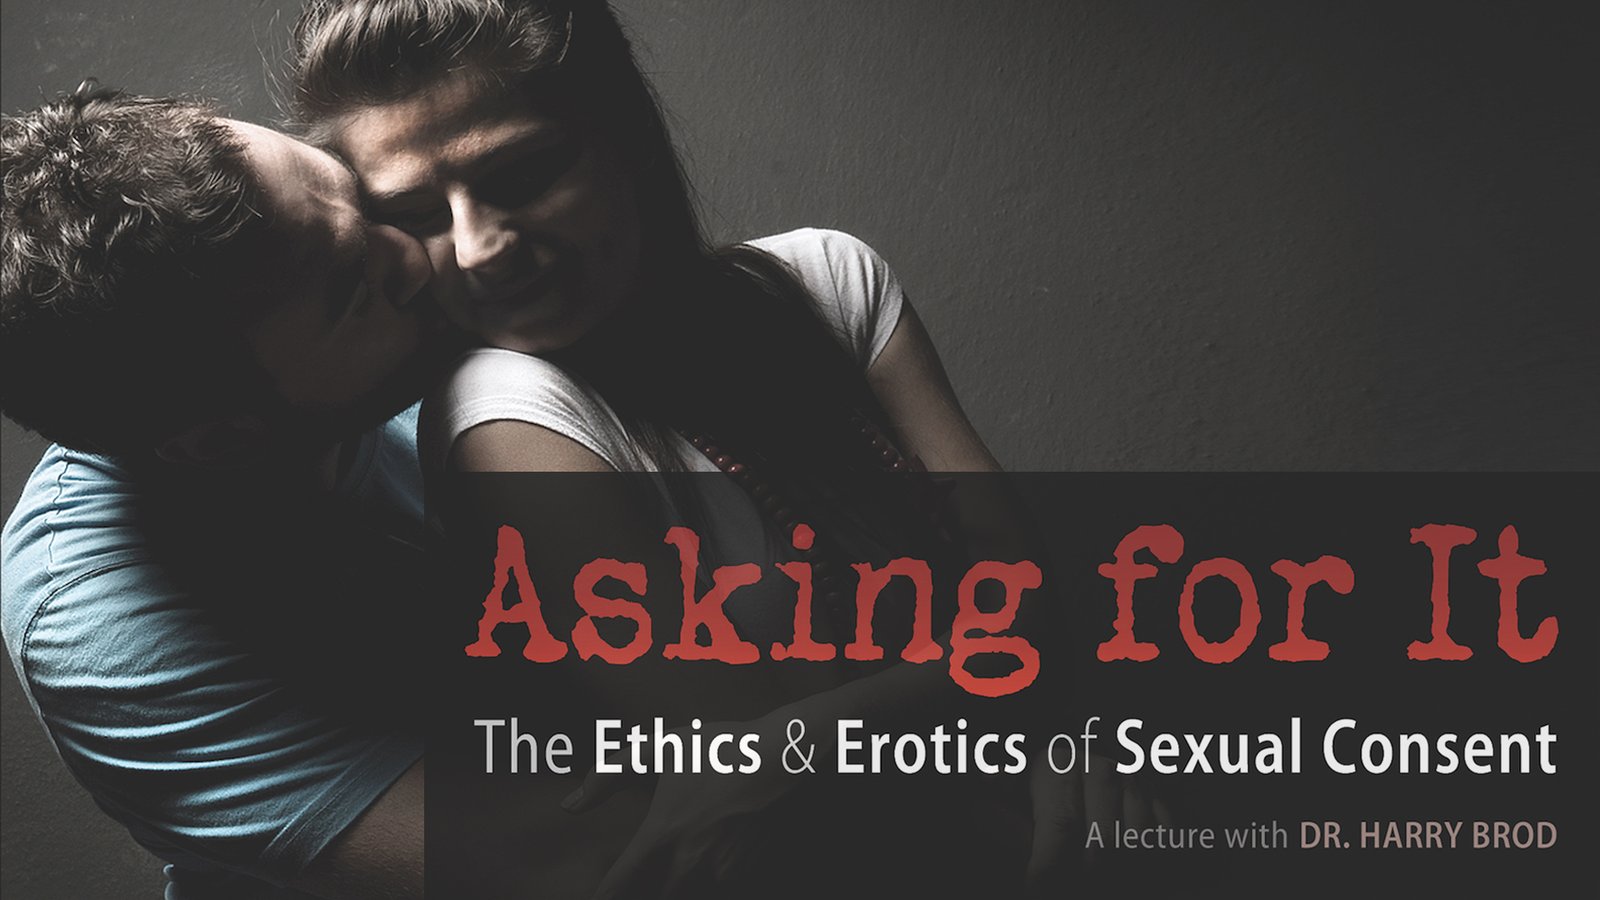 Asking For It - The Ethics & Erotics of Sexual Consent